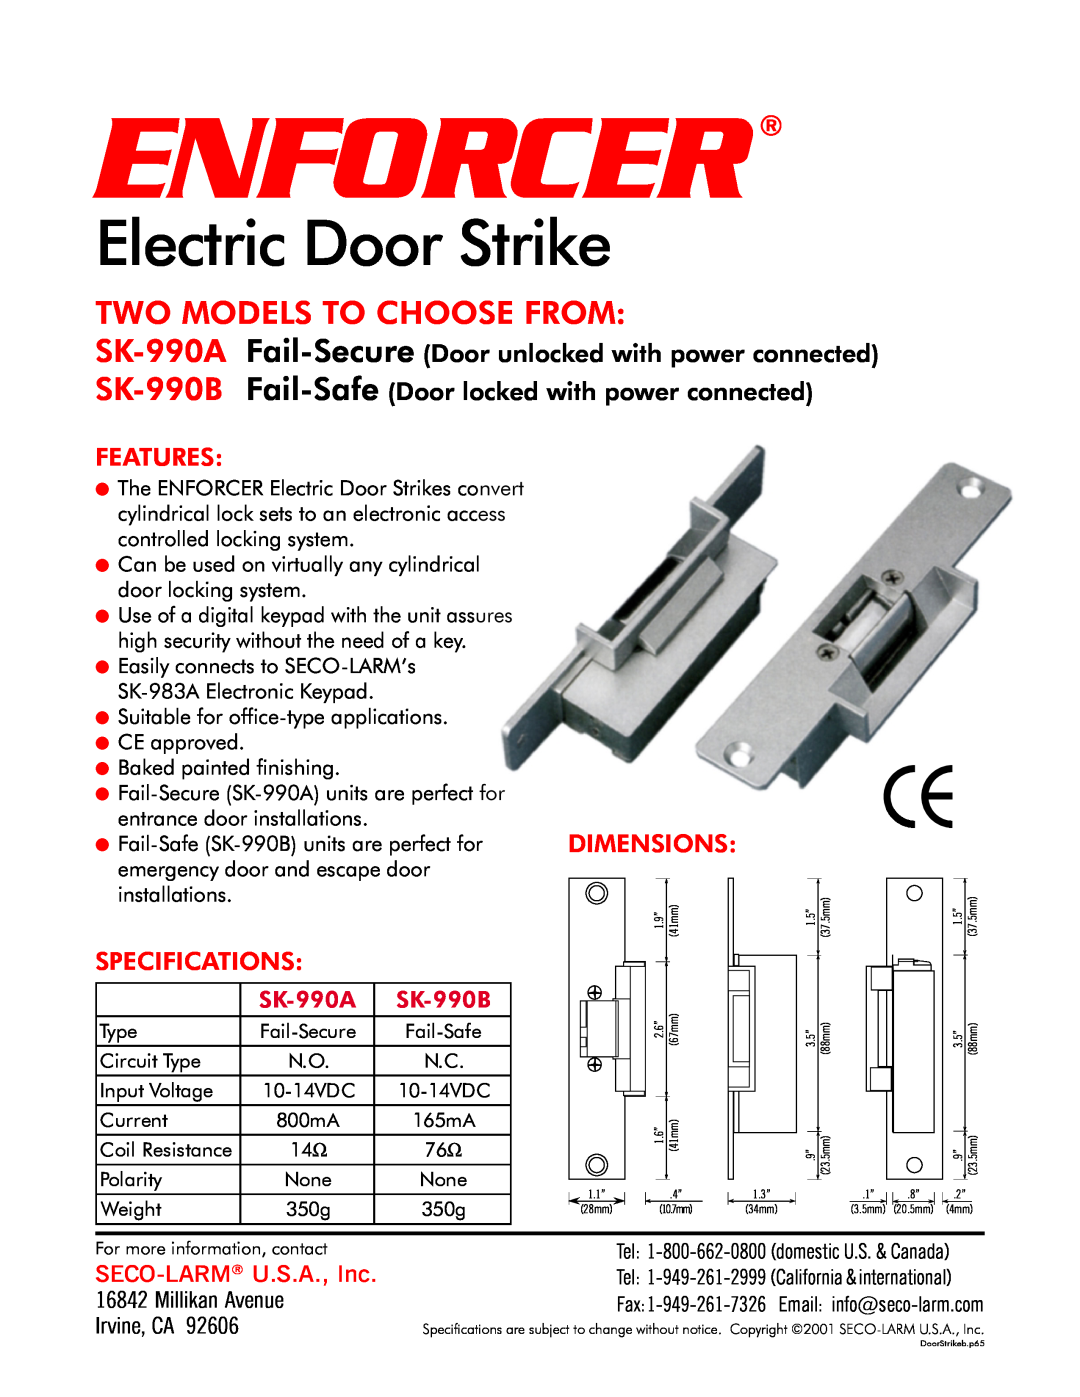 SECO-LARM USA SK-990B specifications Enforcer, Electric Door Strike, Two Models To Choose From, Features, Specifications 